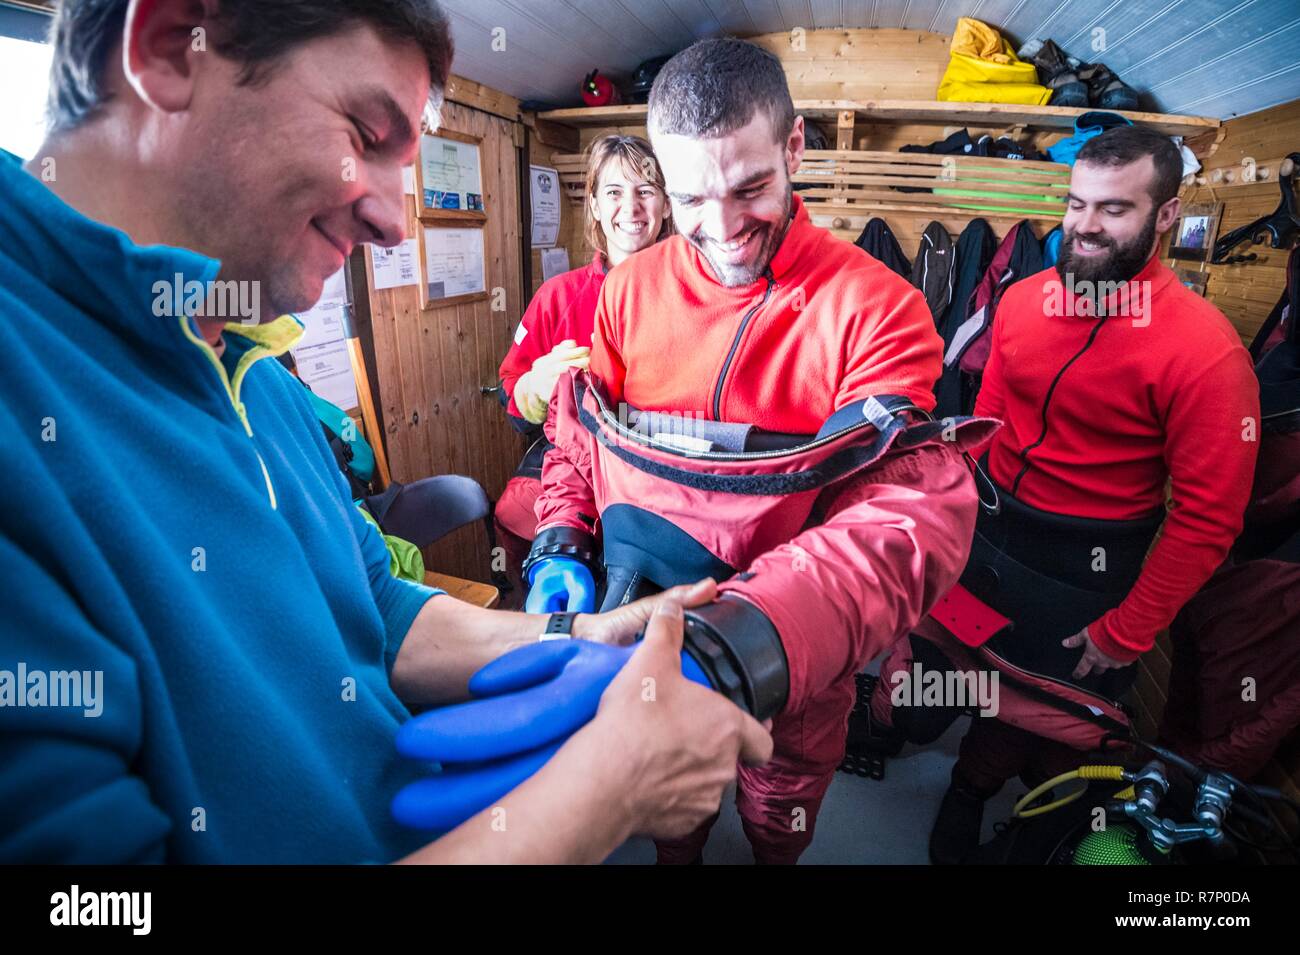 France, Isère (38), Belledonne, Chamrousse, Robert Lakes, after the pair of wool gloves to keep the hands at good temperature, an instructor screws the pair of waterproof gloves on the suit, before an ice diving - Dive Xtreme Stock Photo